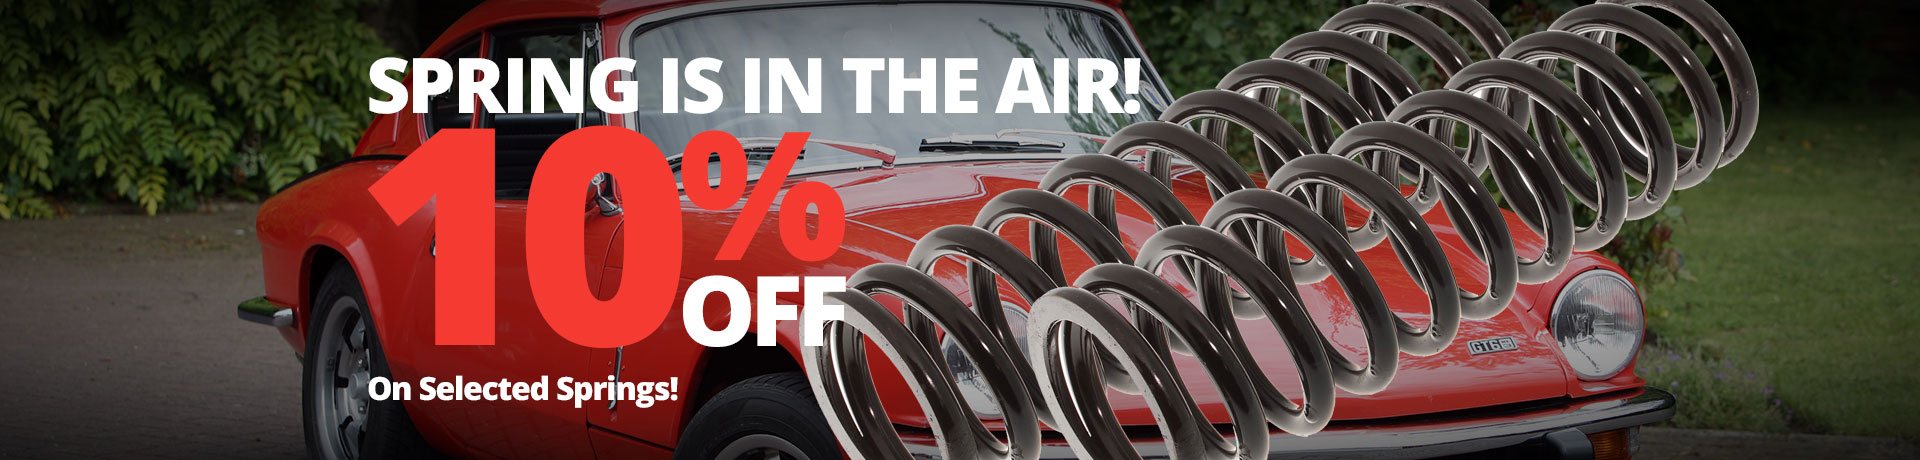 Save 10% on Selected Springs